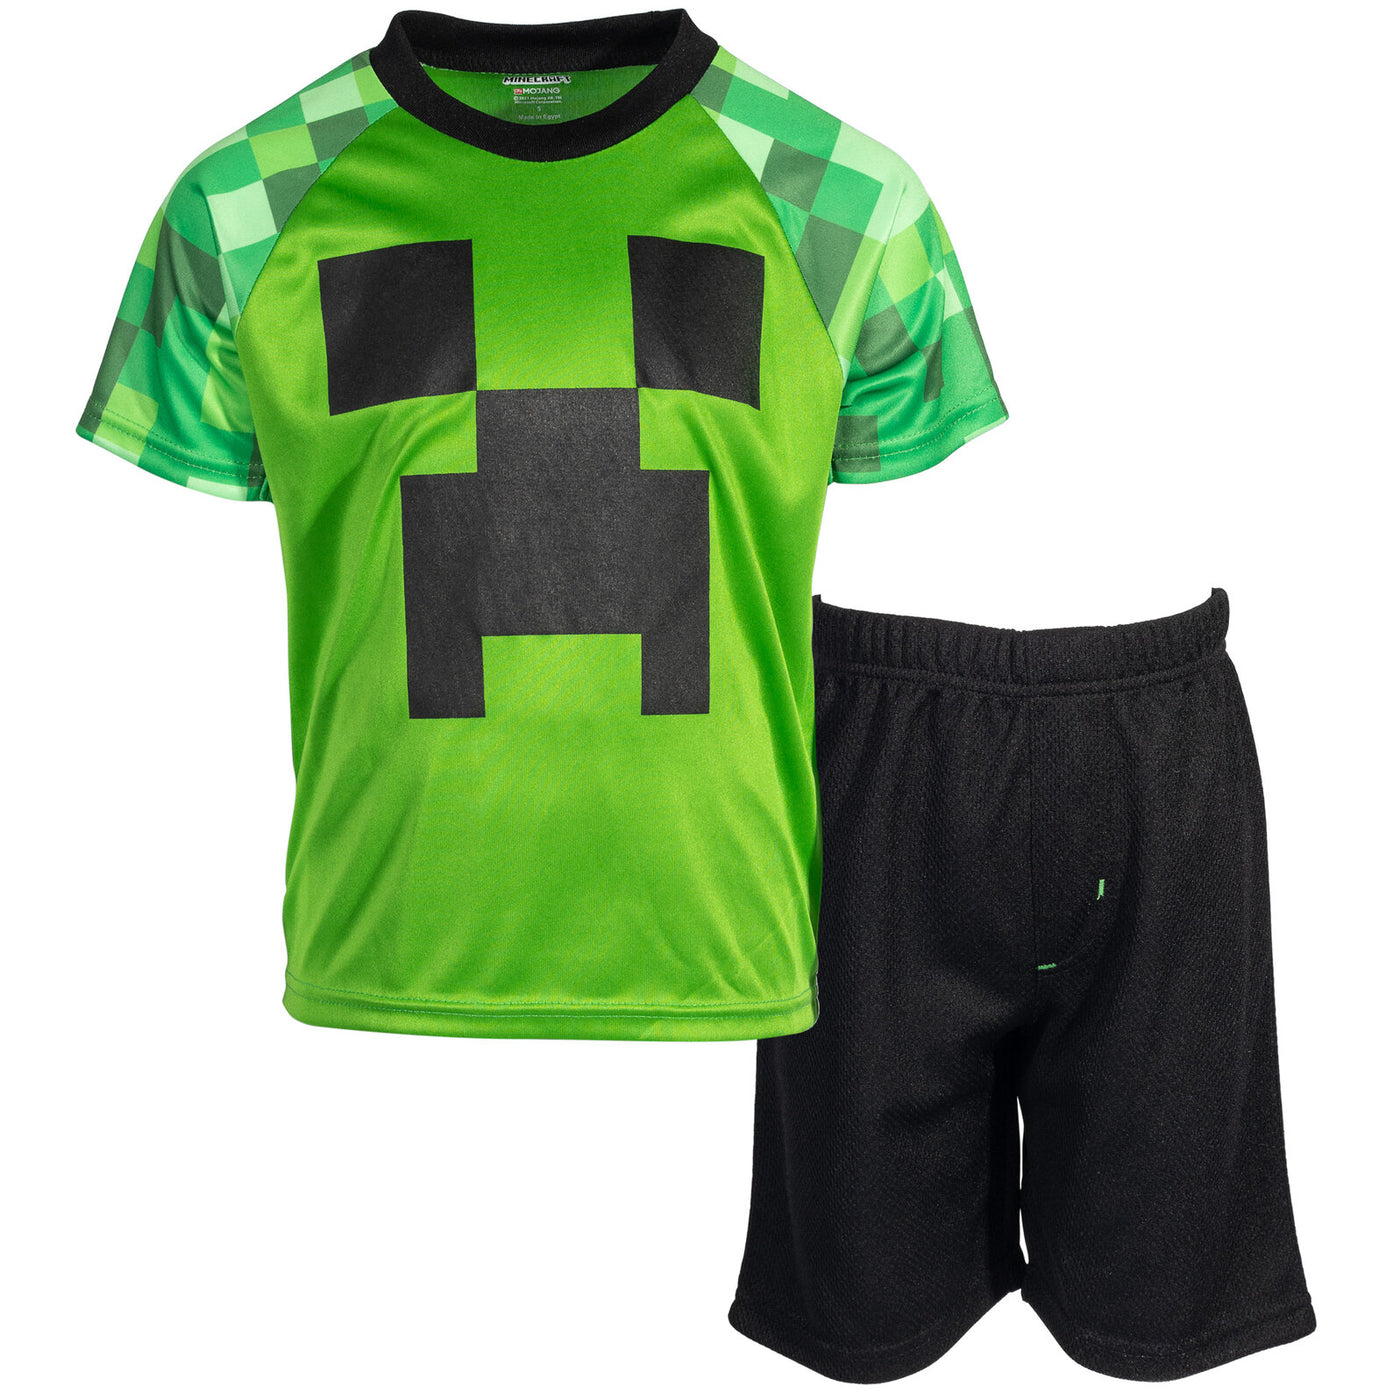 Minecraft Creeper Cosplay T-Shirt and Mesh Shorts Outfit Set